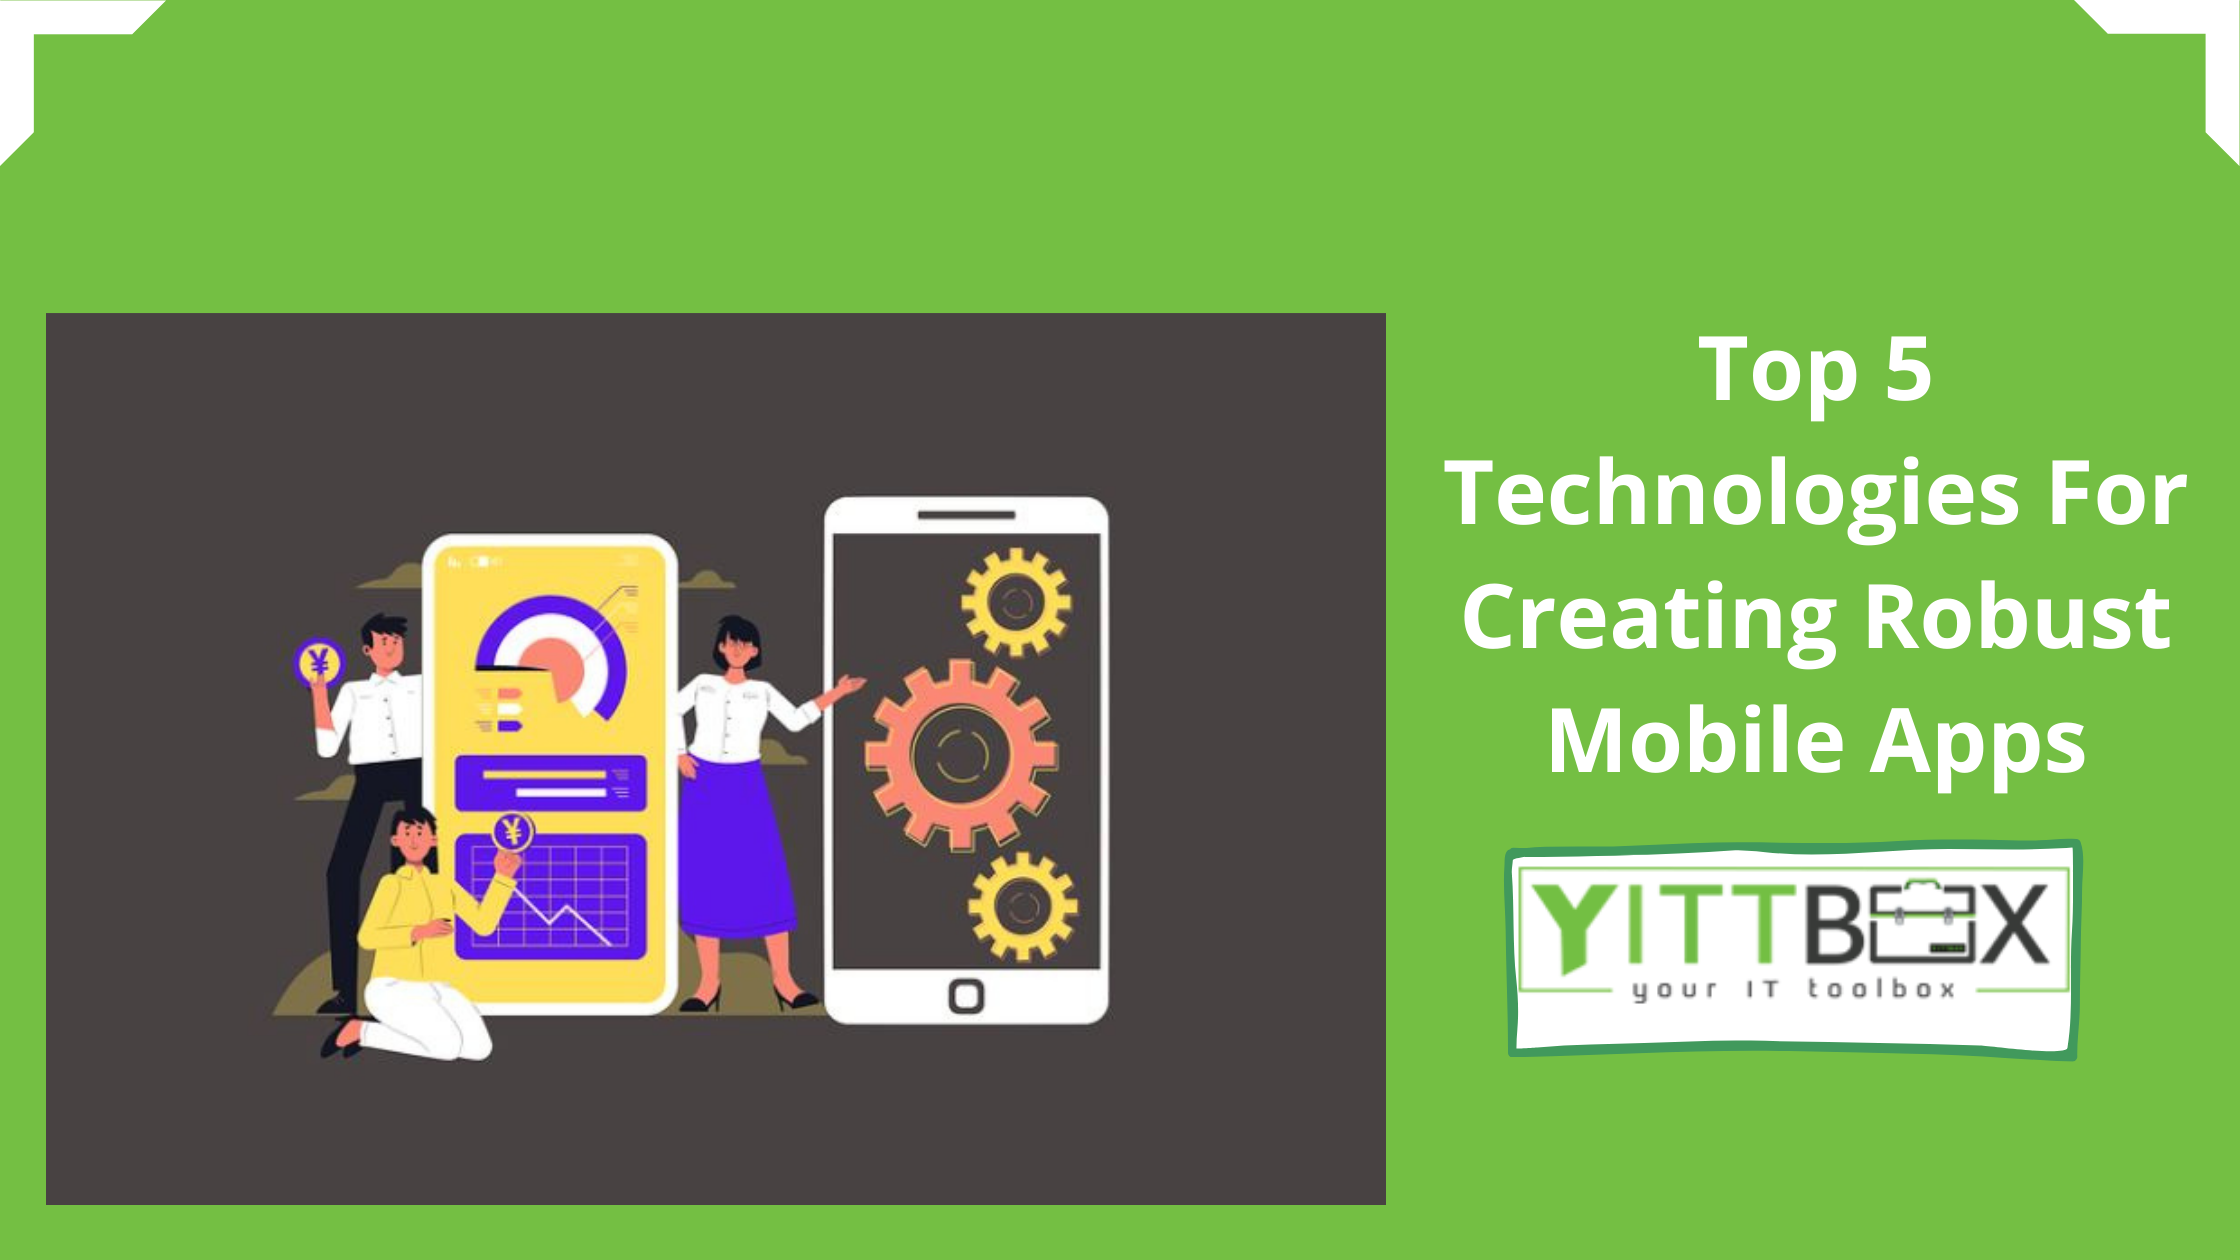 Top 5 Technologies For Creating Robust Mobile Apps